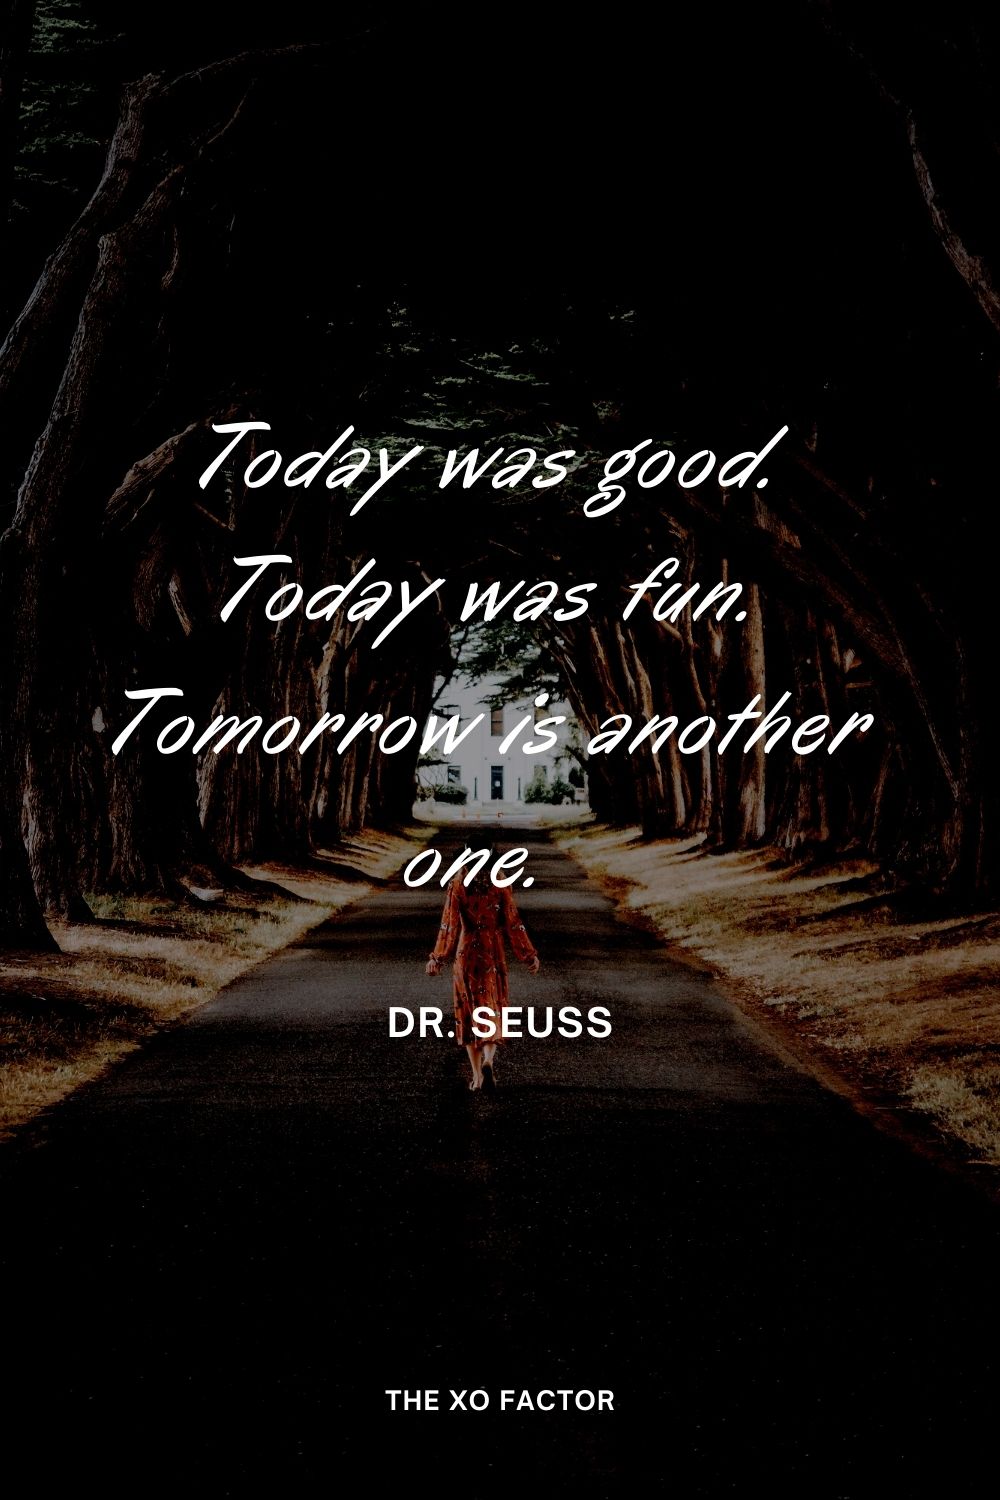 Today was good. Today was fun. Tomorrow is another one.  Dr. Seuss